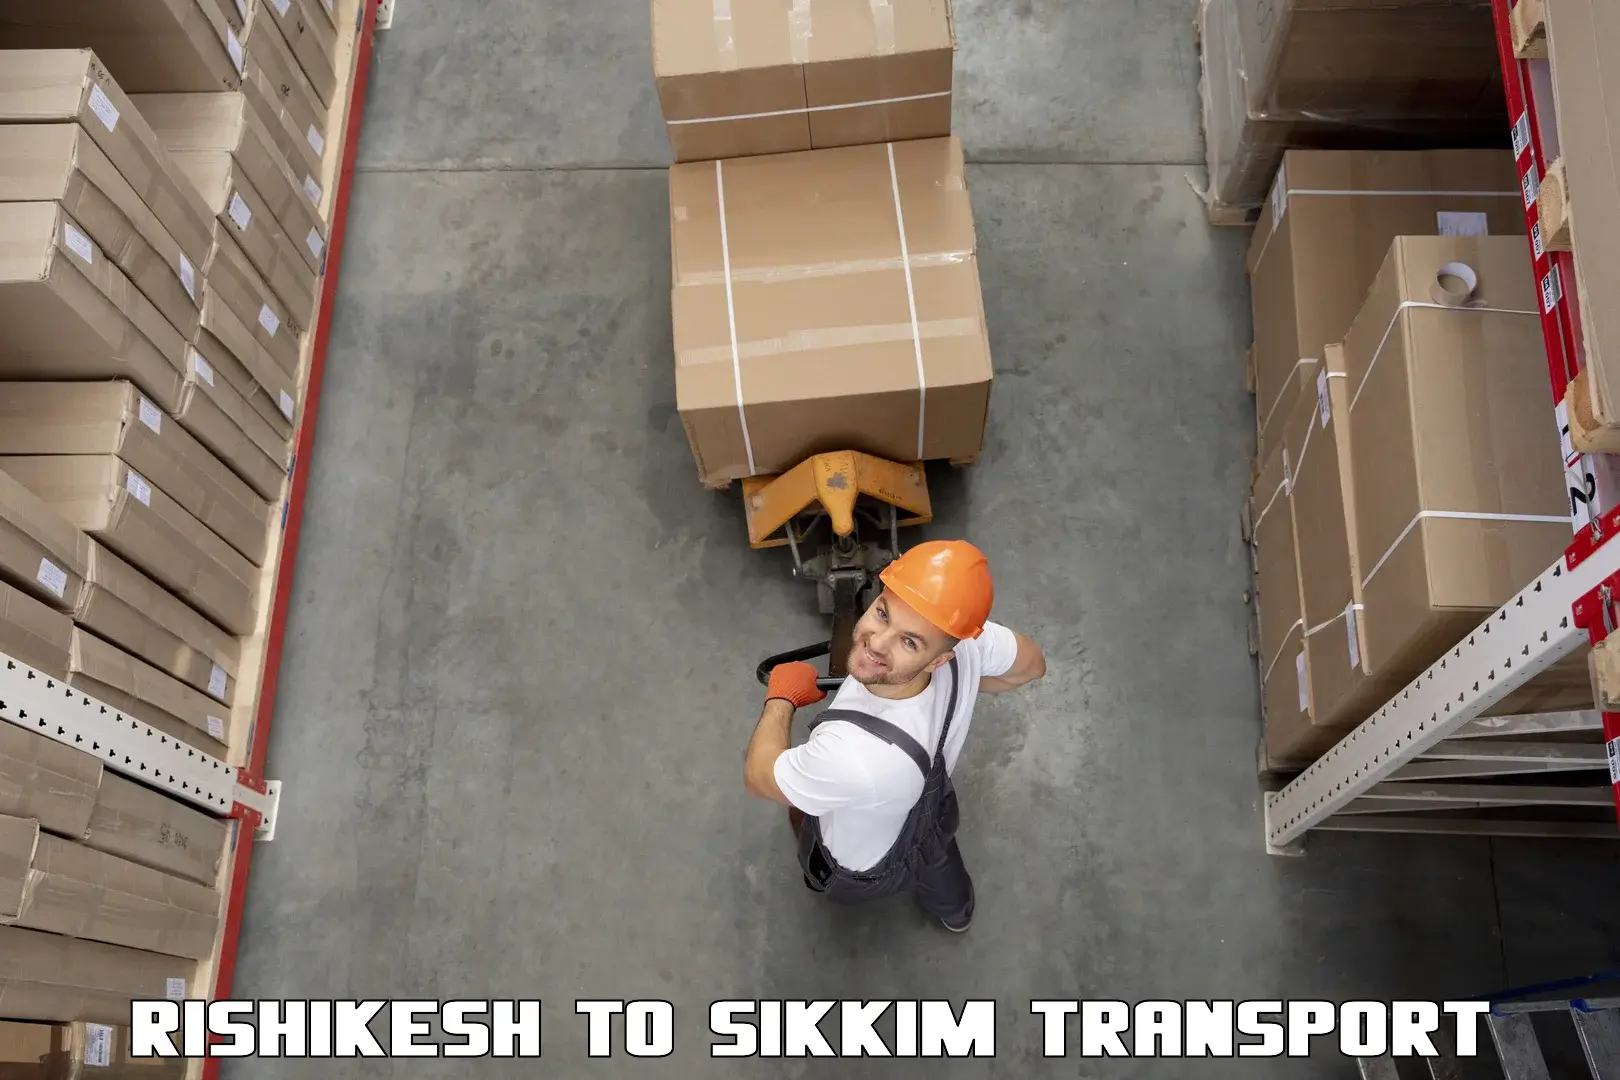 Air cargo transport services Rishikesh to Pelling